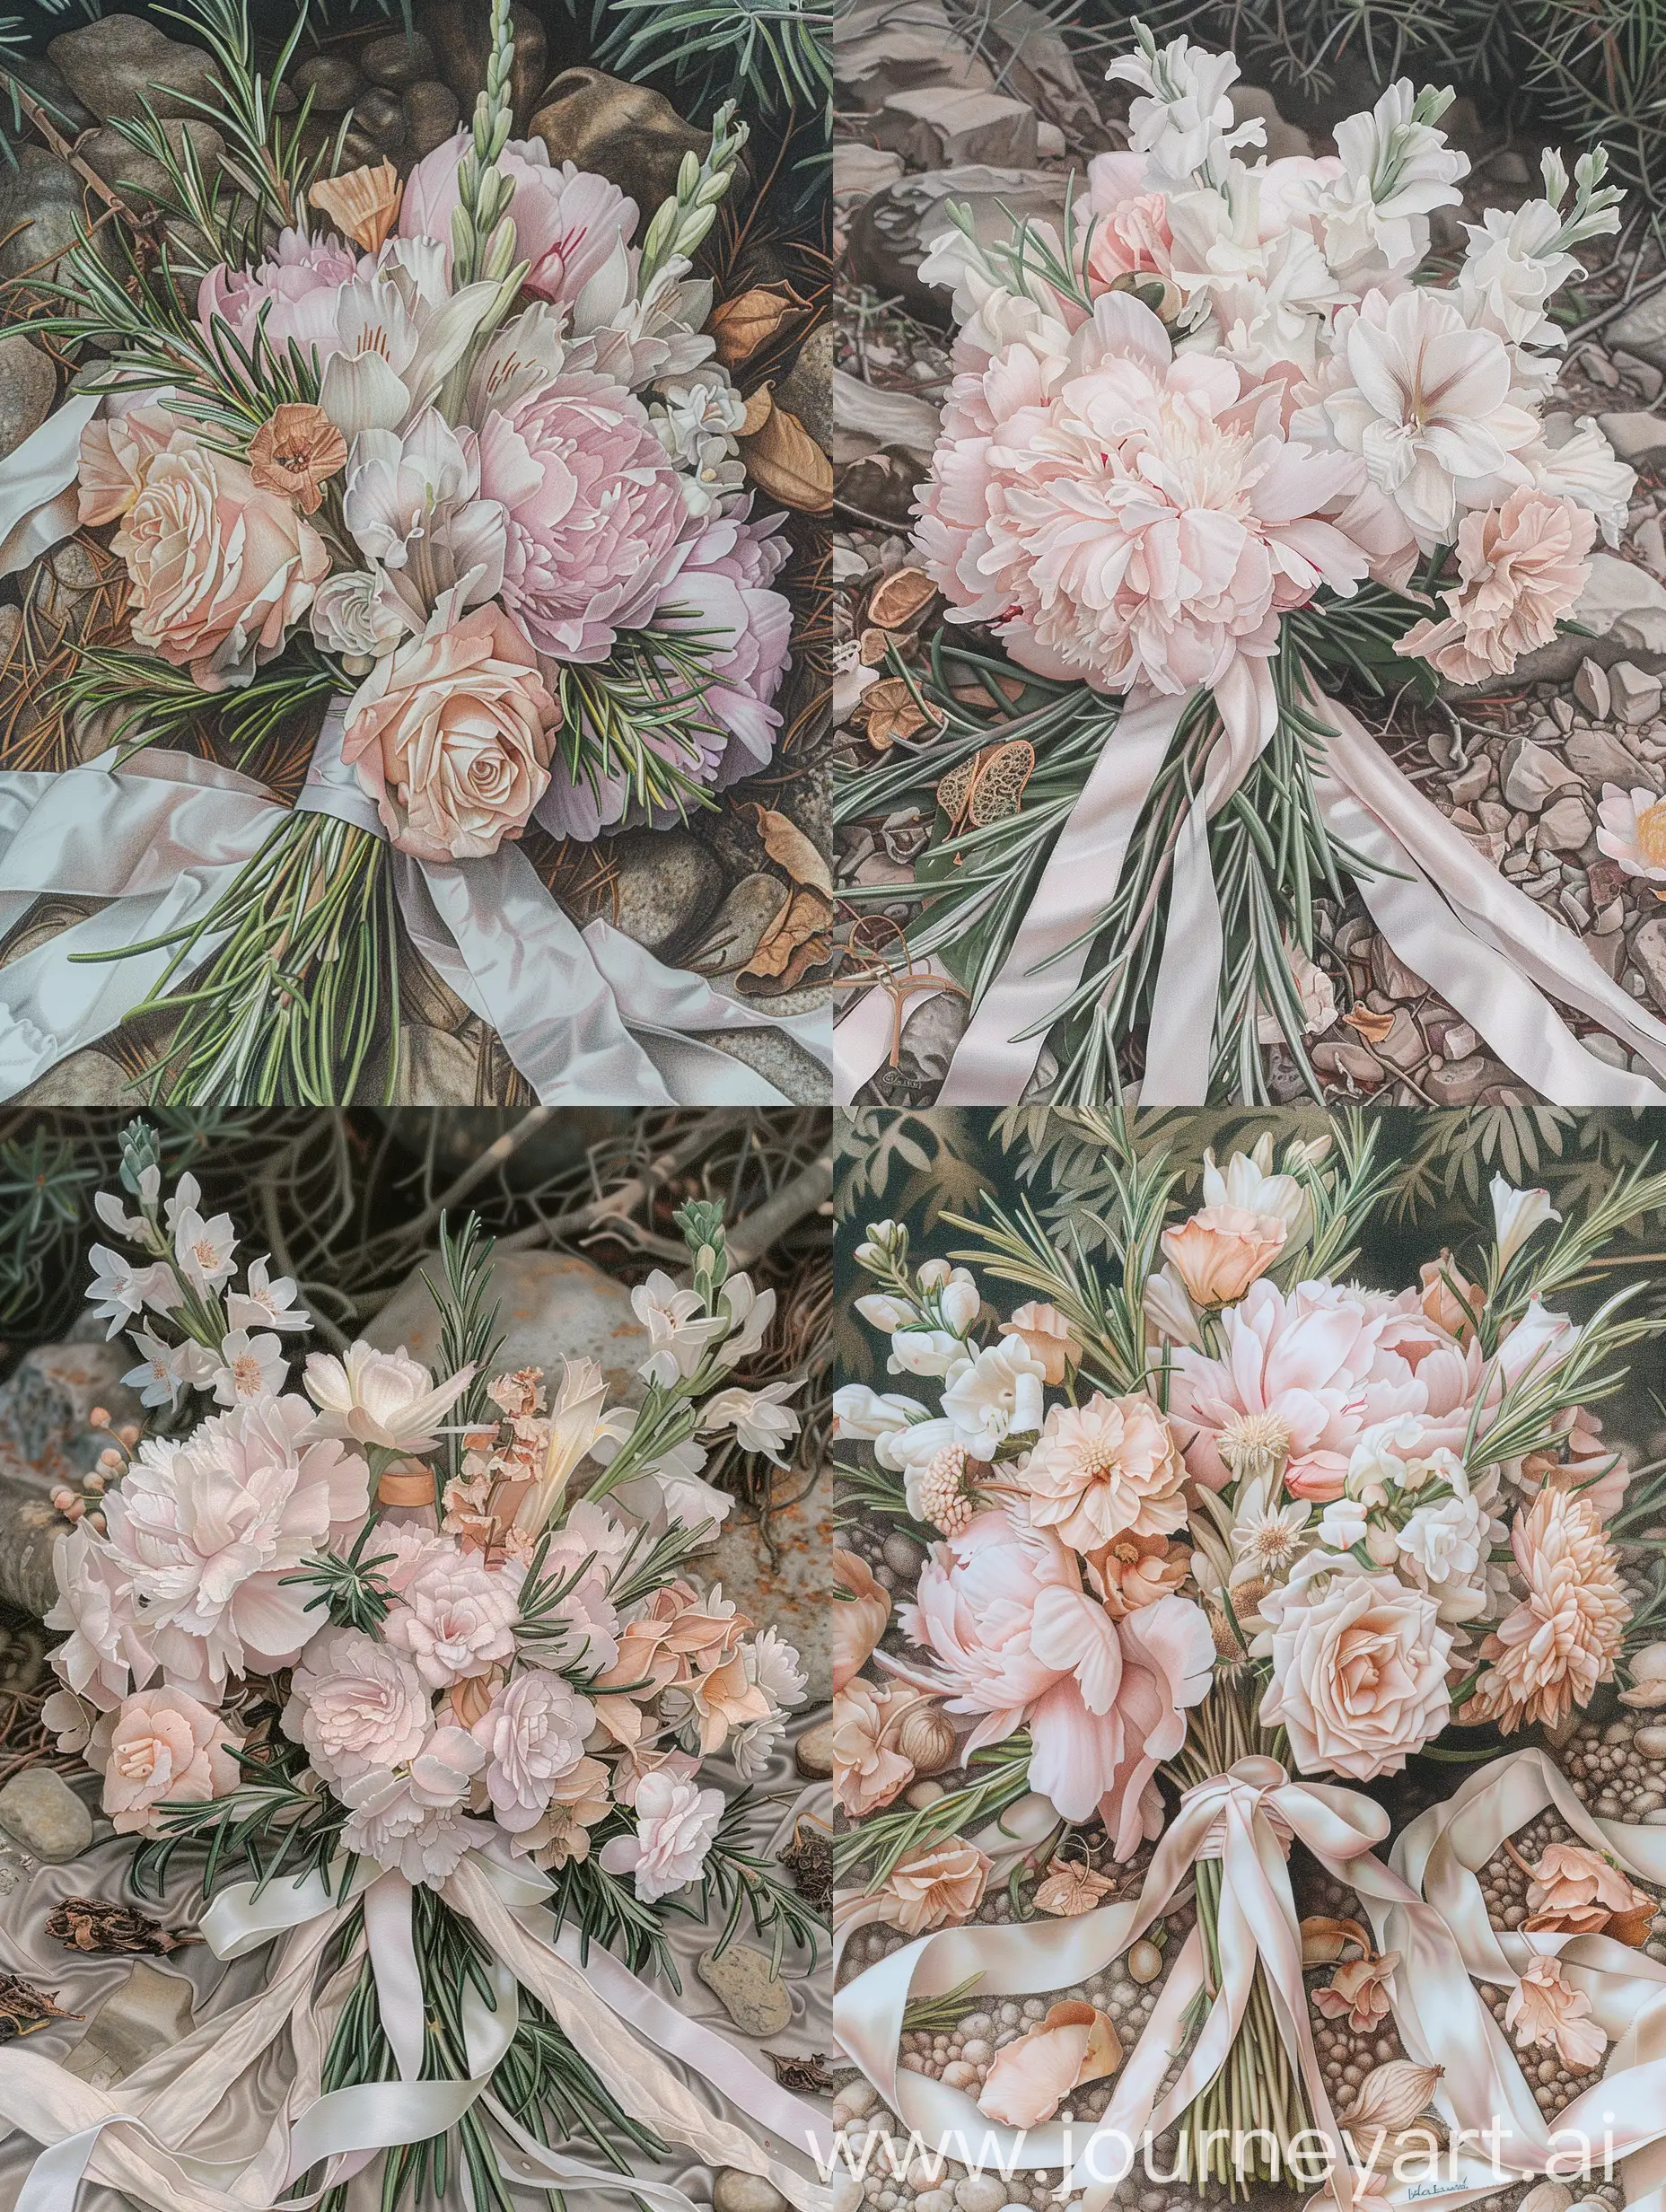 Delicate-Botanical-Bouquet-Rosemary-Peonies-Gladioli-and-Eustoma-Sketch-on-Forest-Background